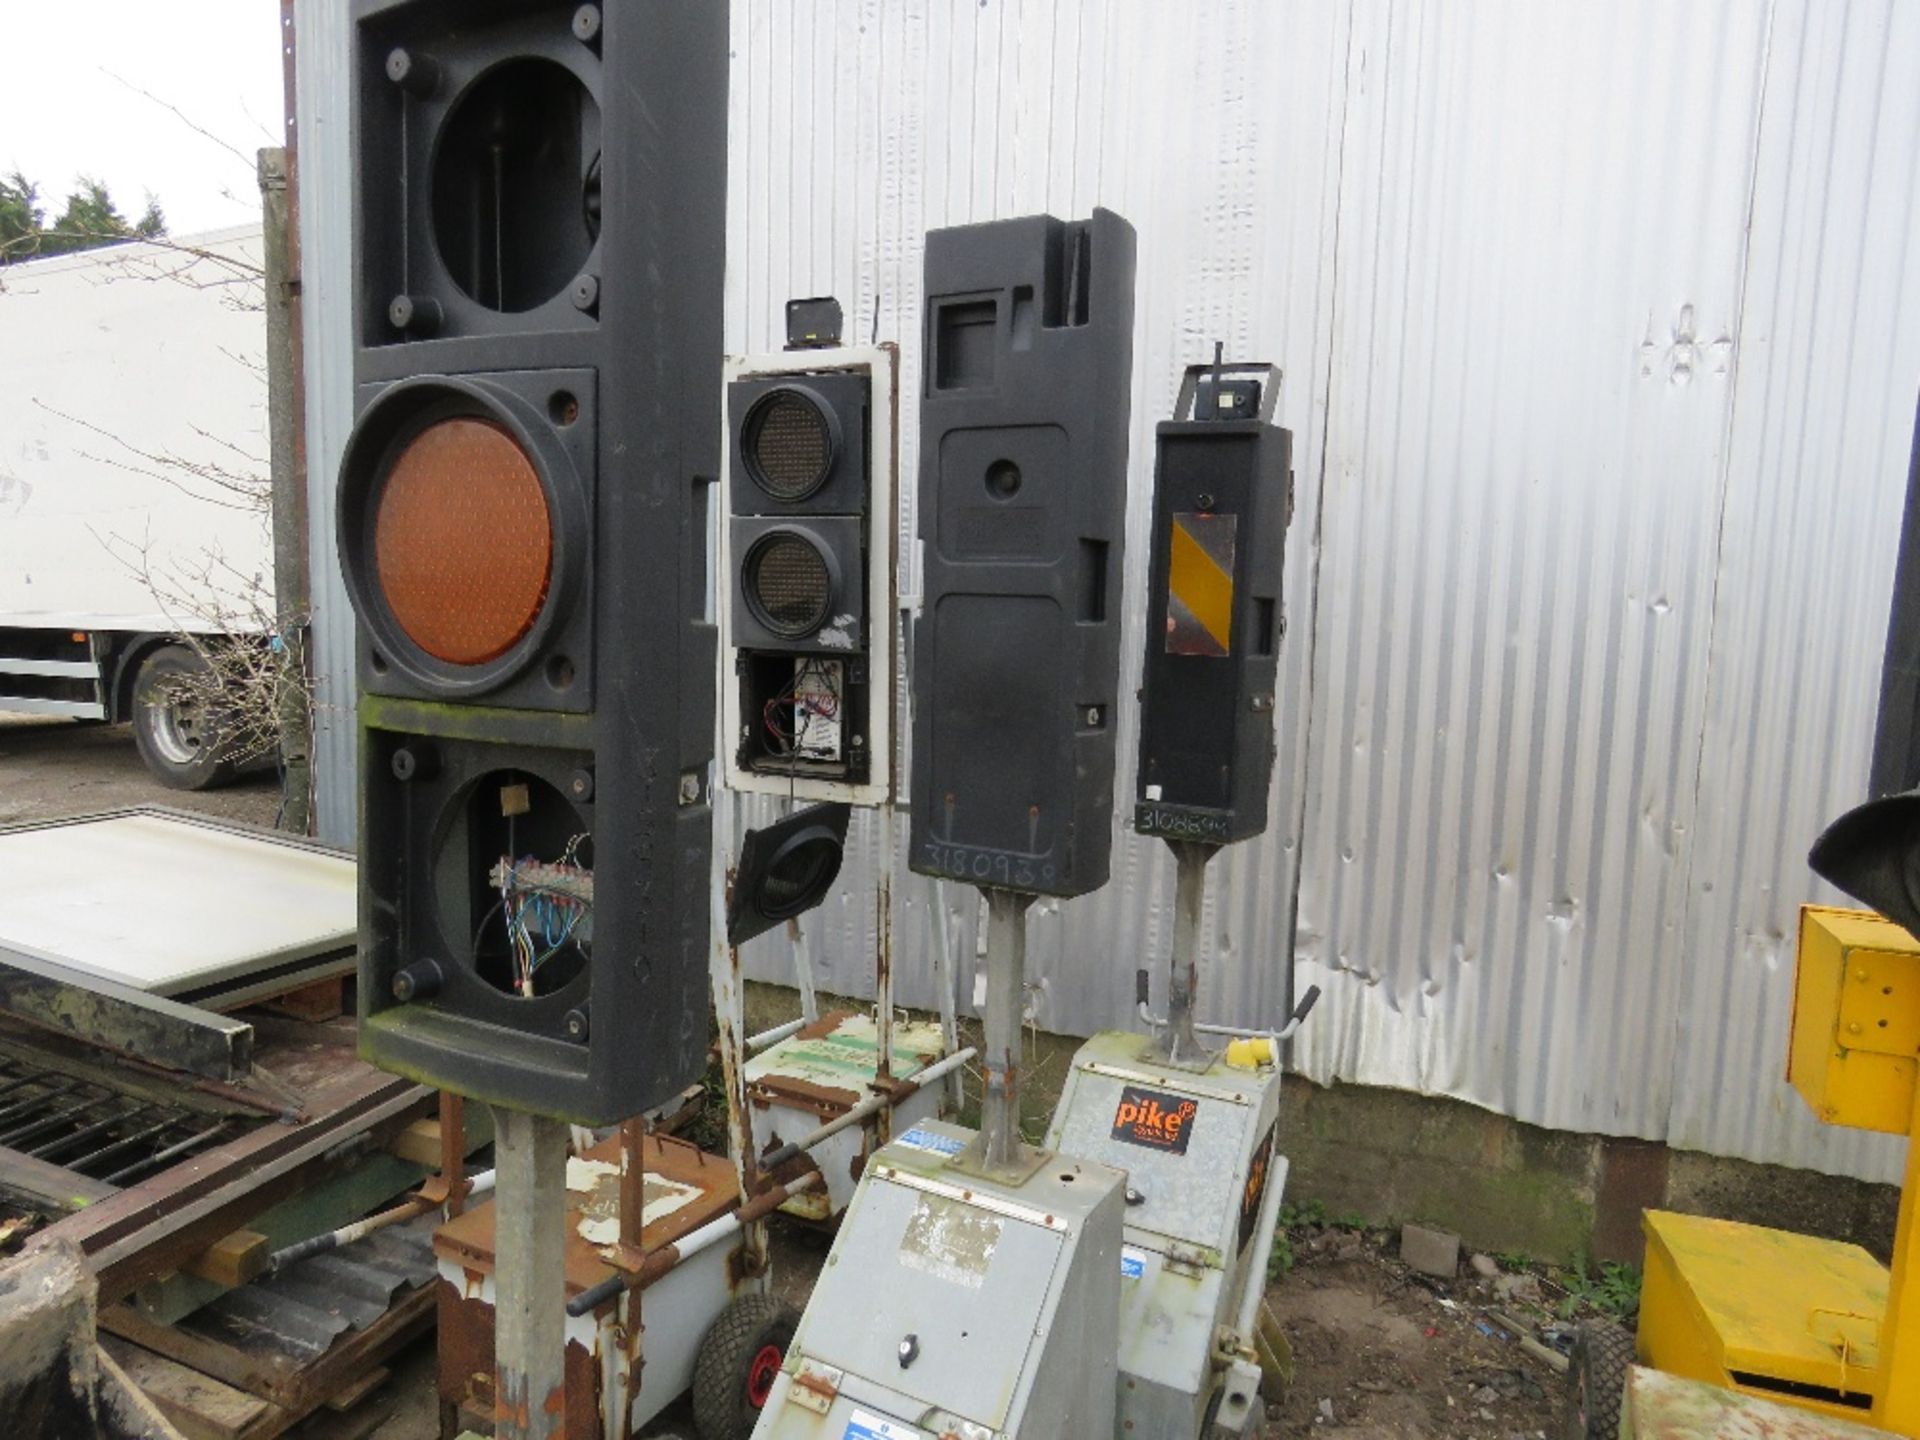 3 X PIKE MOBILE TRAFFIC LIGHTS FOR SPARES/REPAIR.